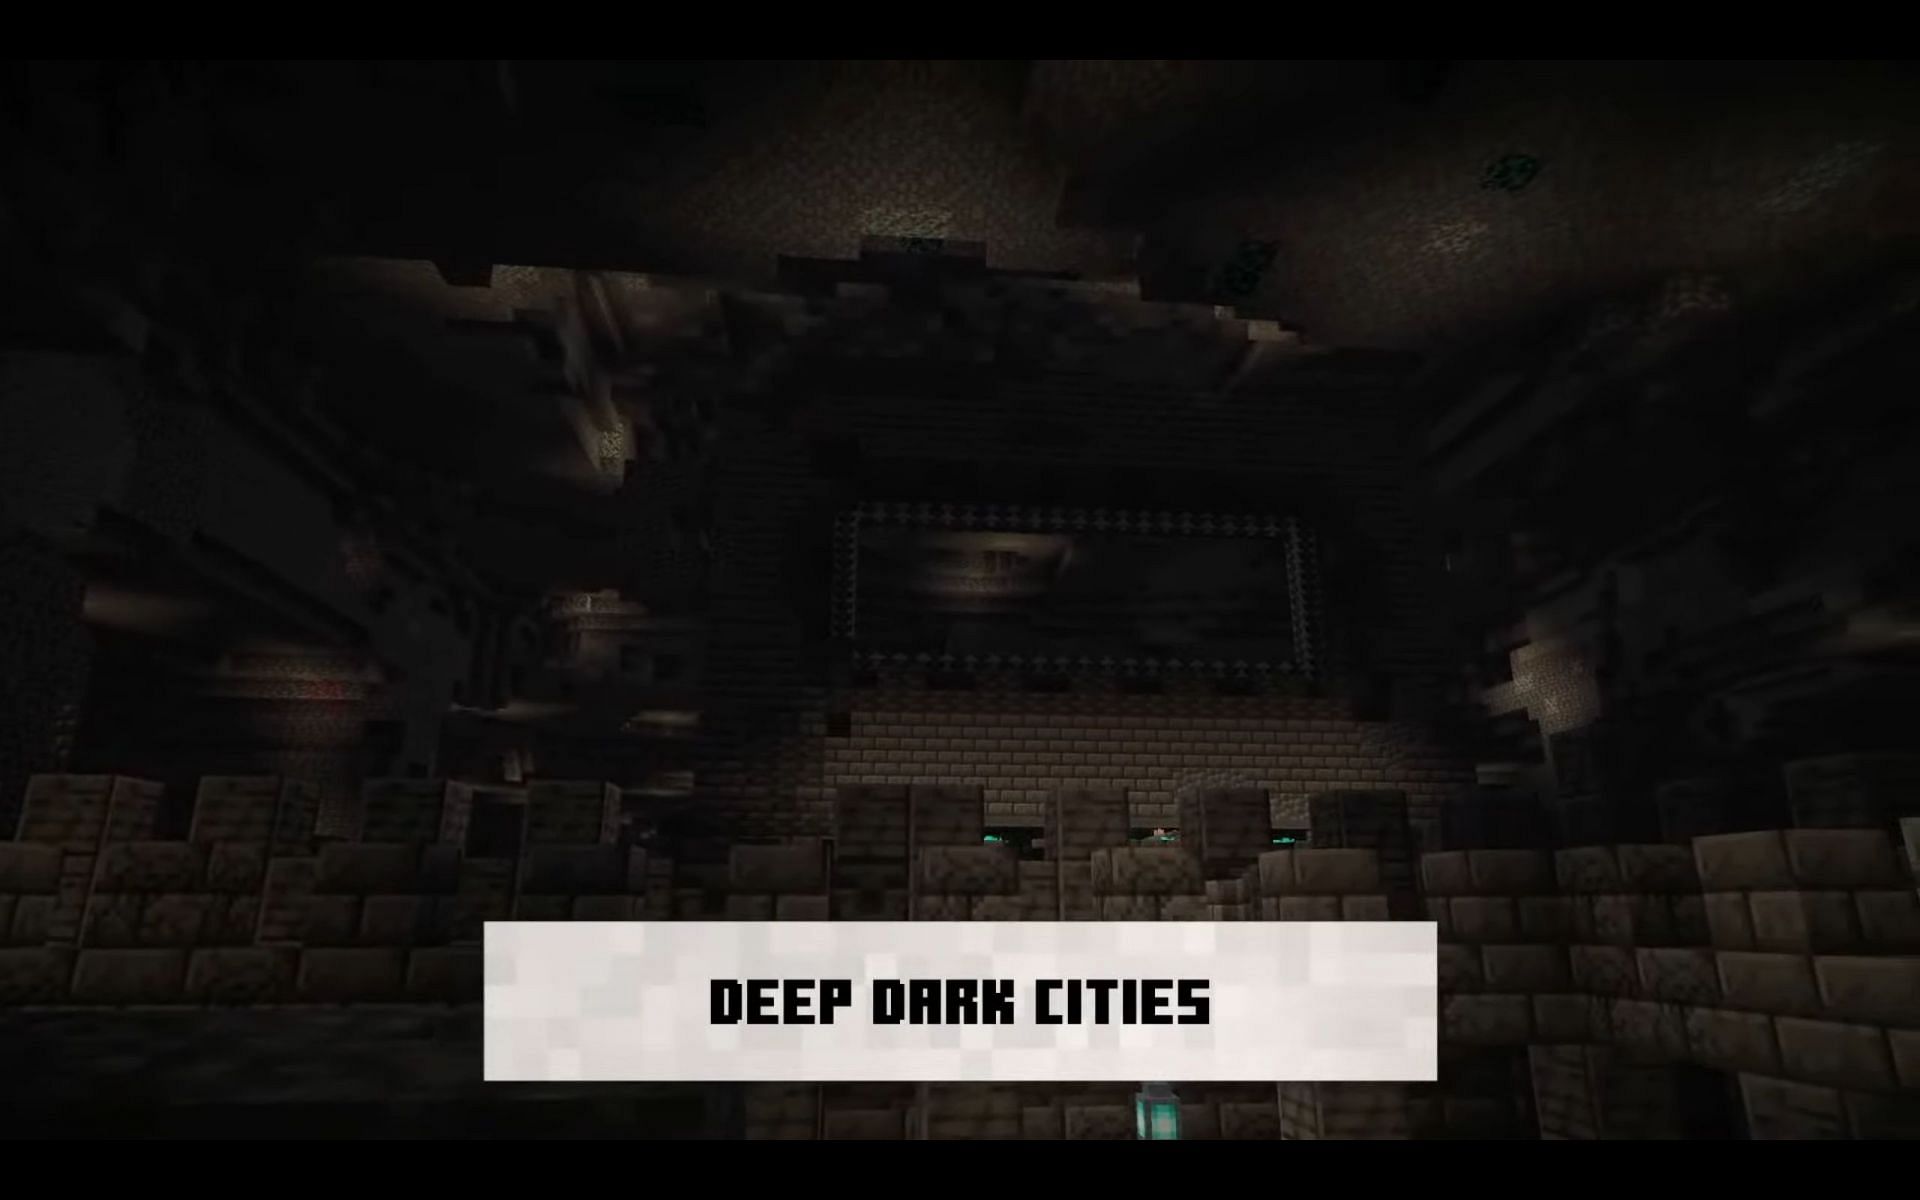 Even though they&#039;ve been delayed, cities in the deep dark biome are exciting many players (Image via Mojang).